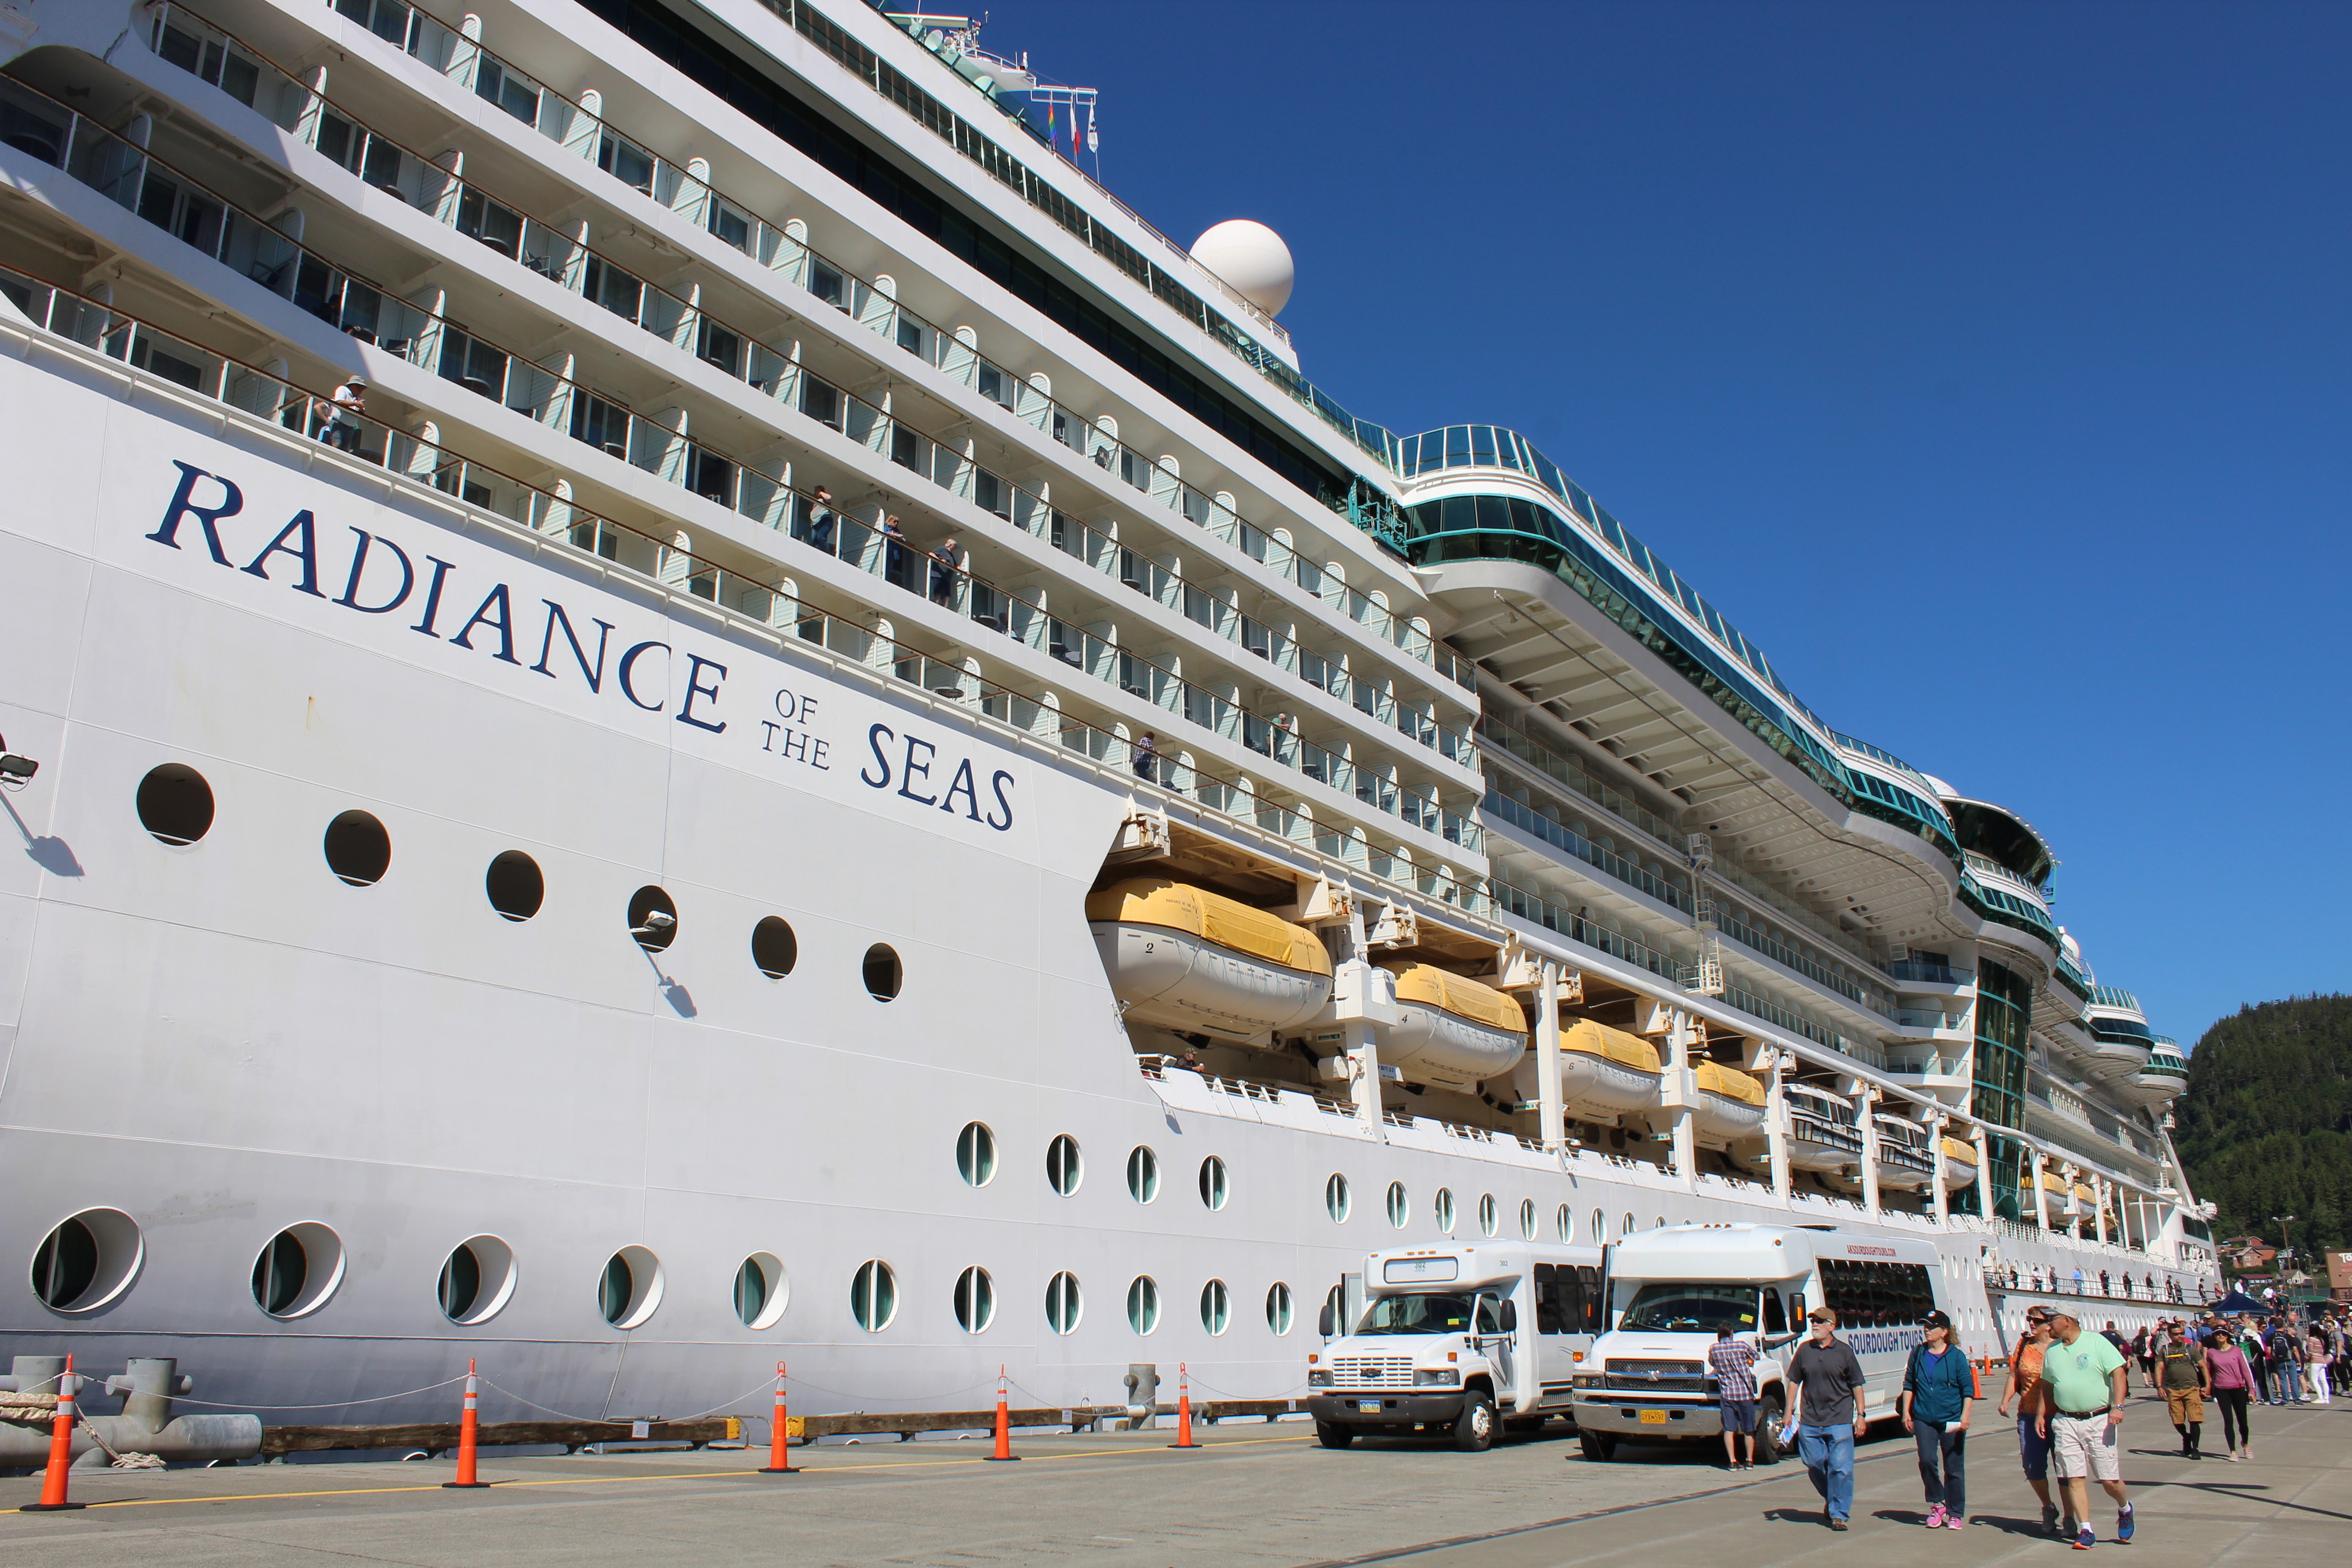 brilliance of the seas reviews